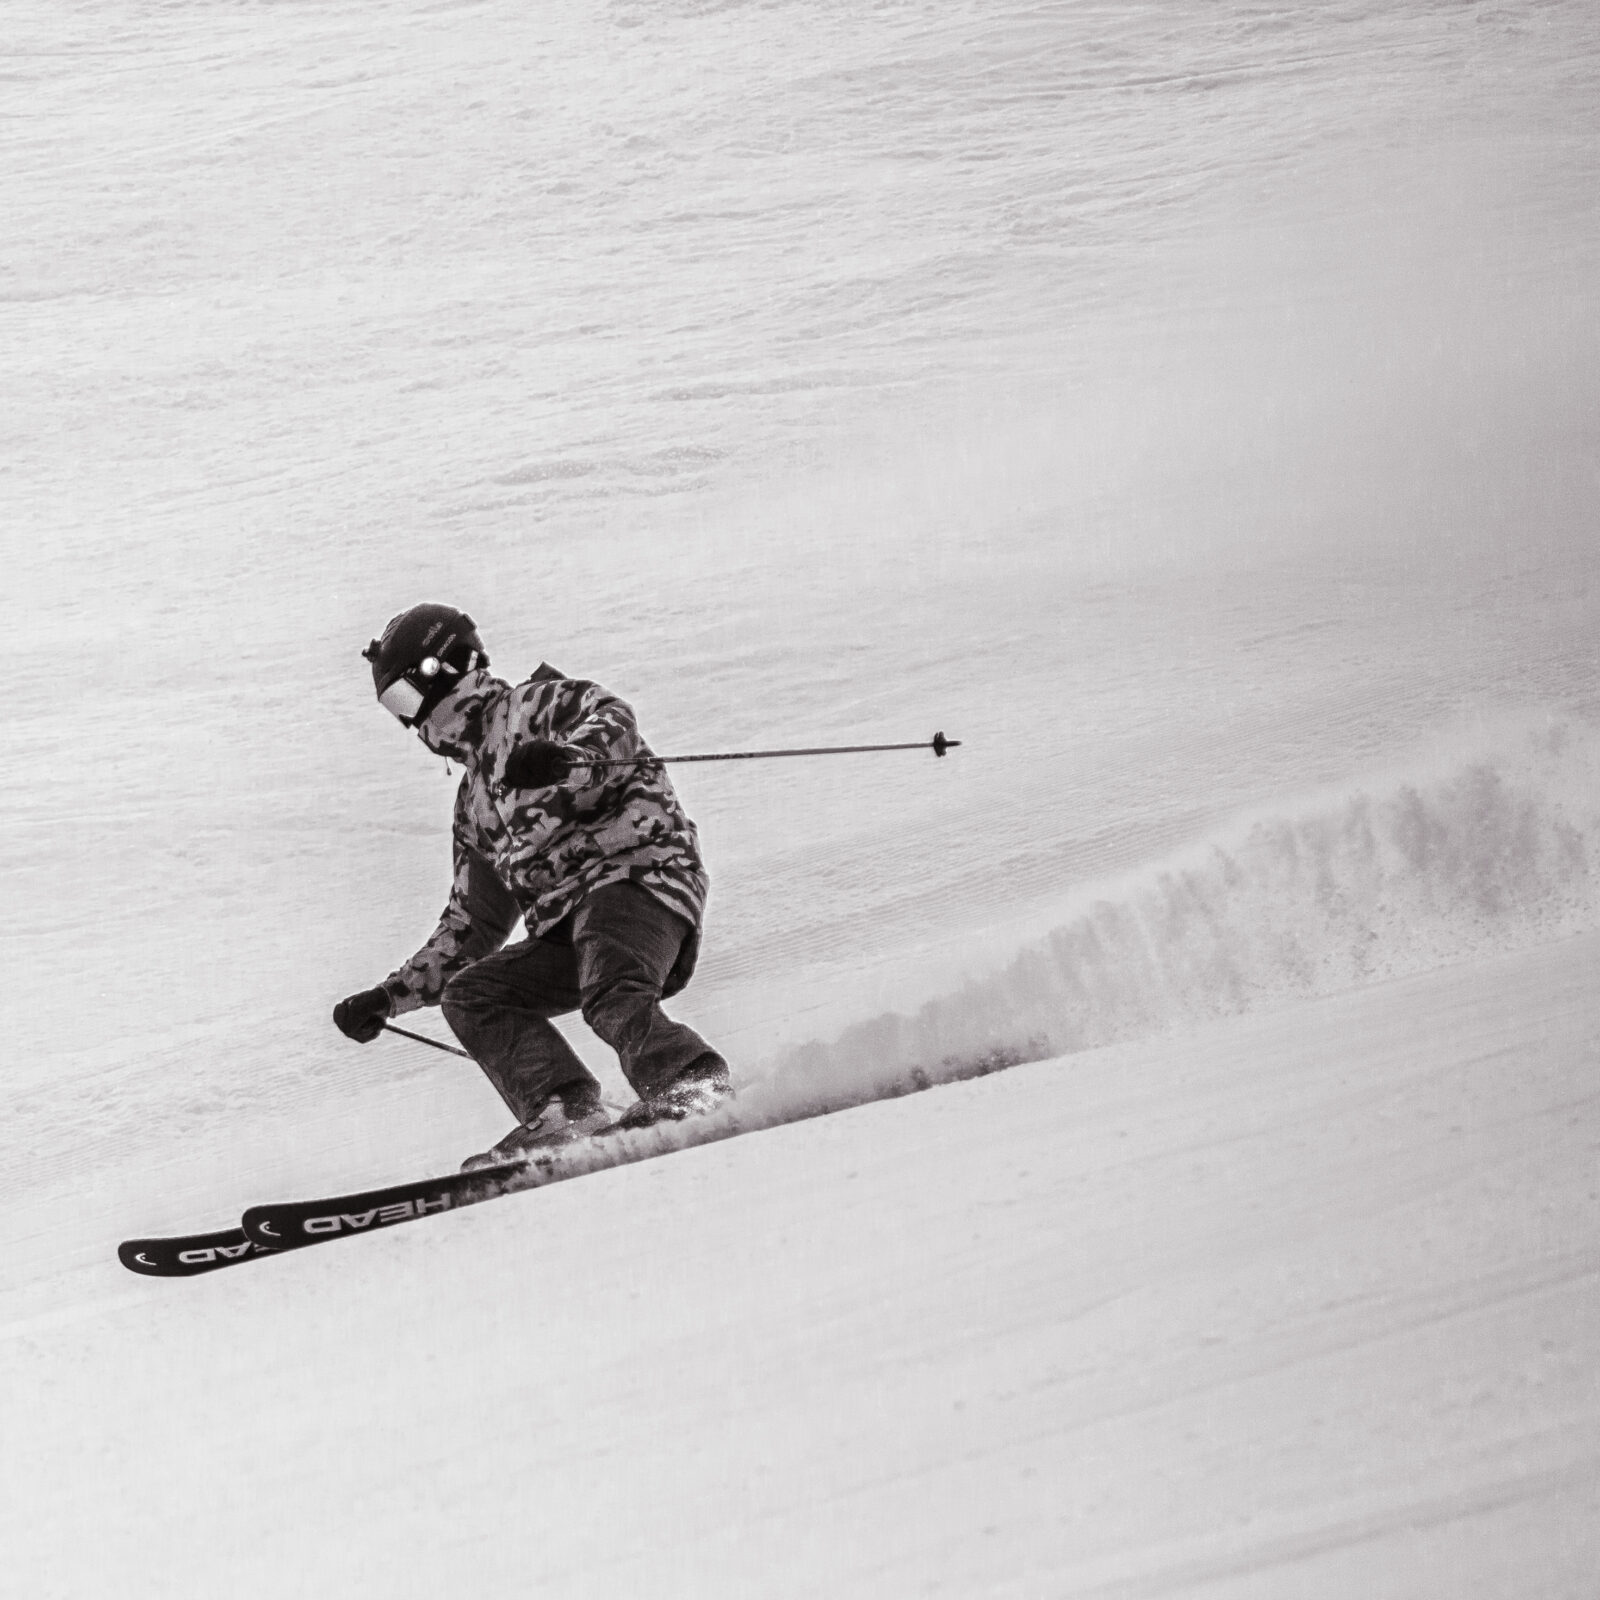 Black and white photo of skier going down Sunspot run off of Chair 2. Skier is wearing a camouflaged jacket.